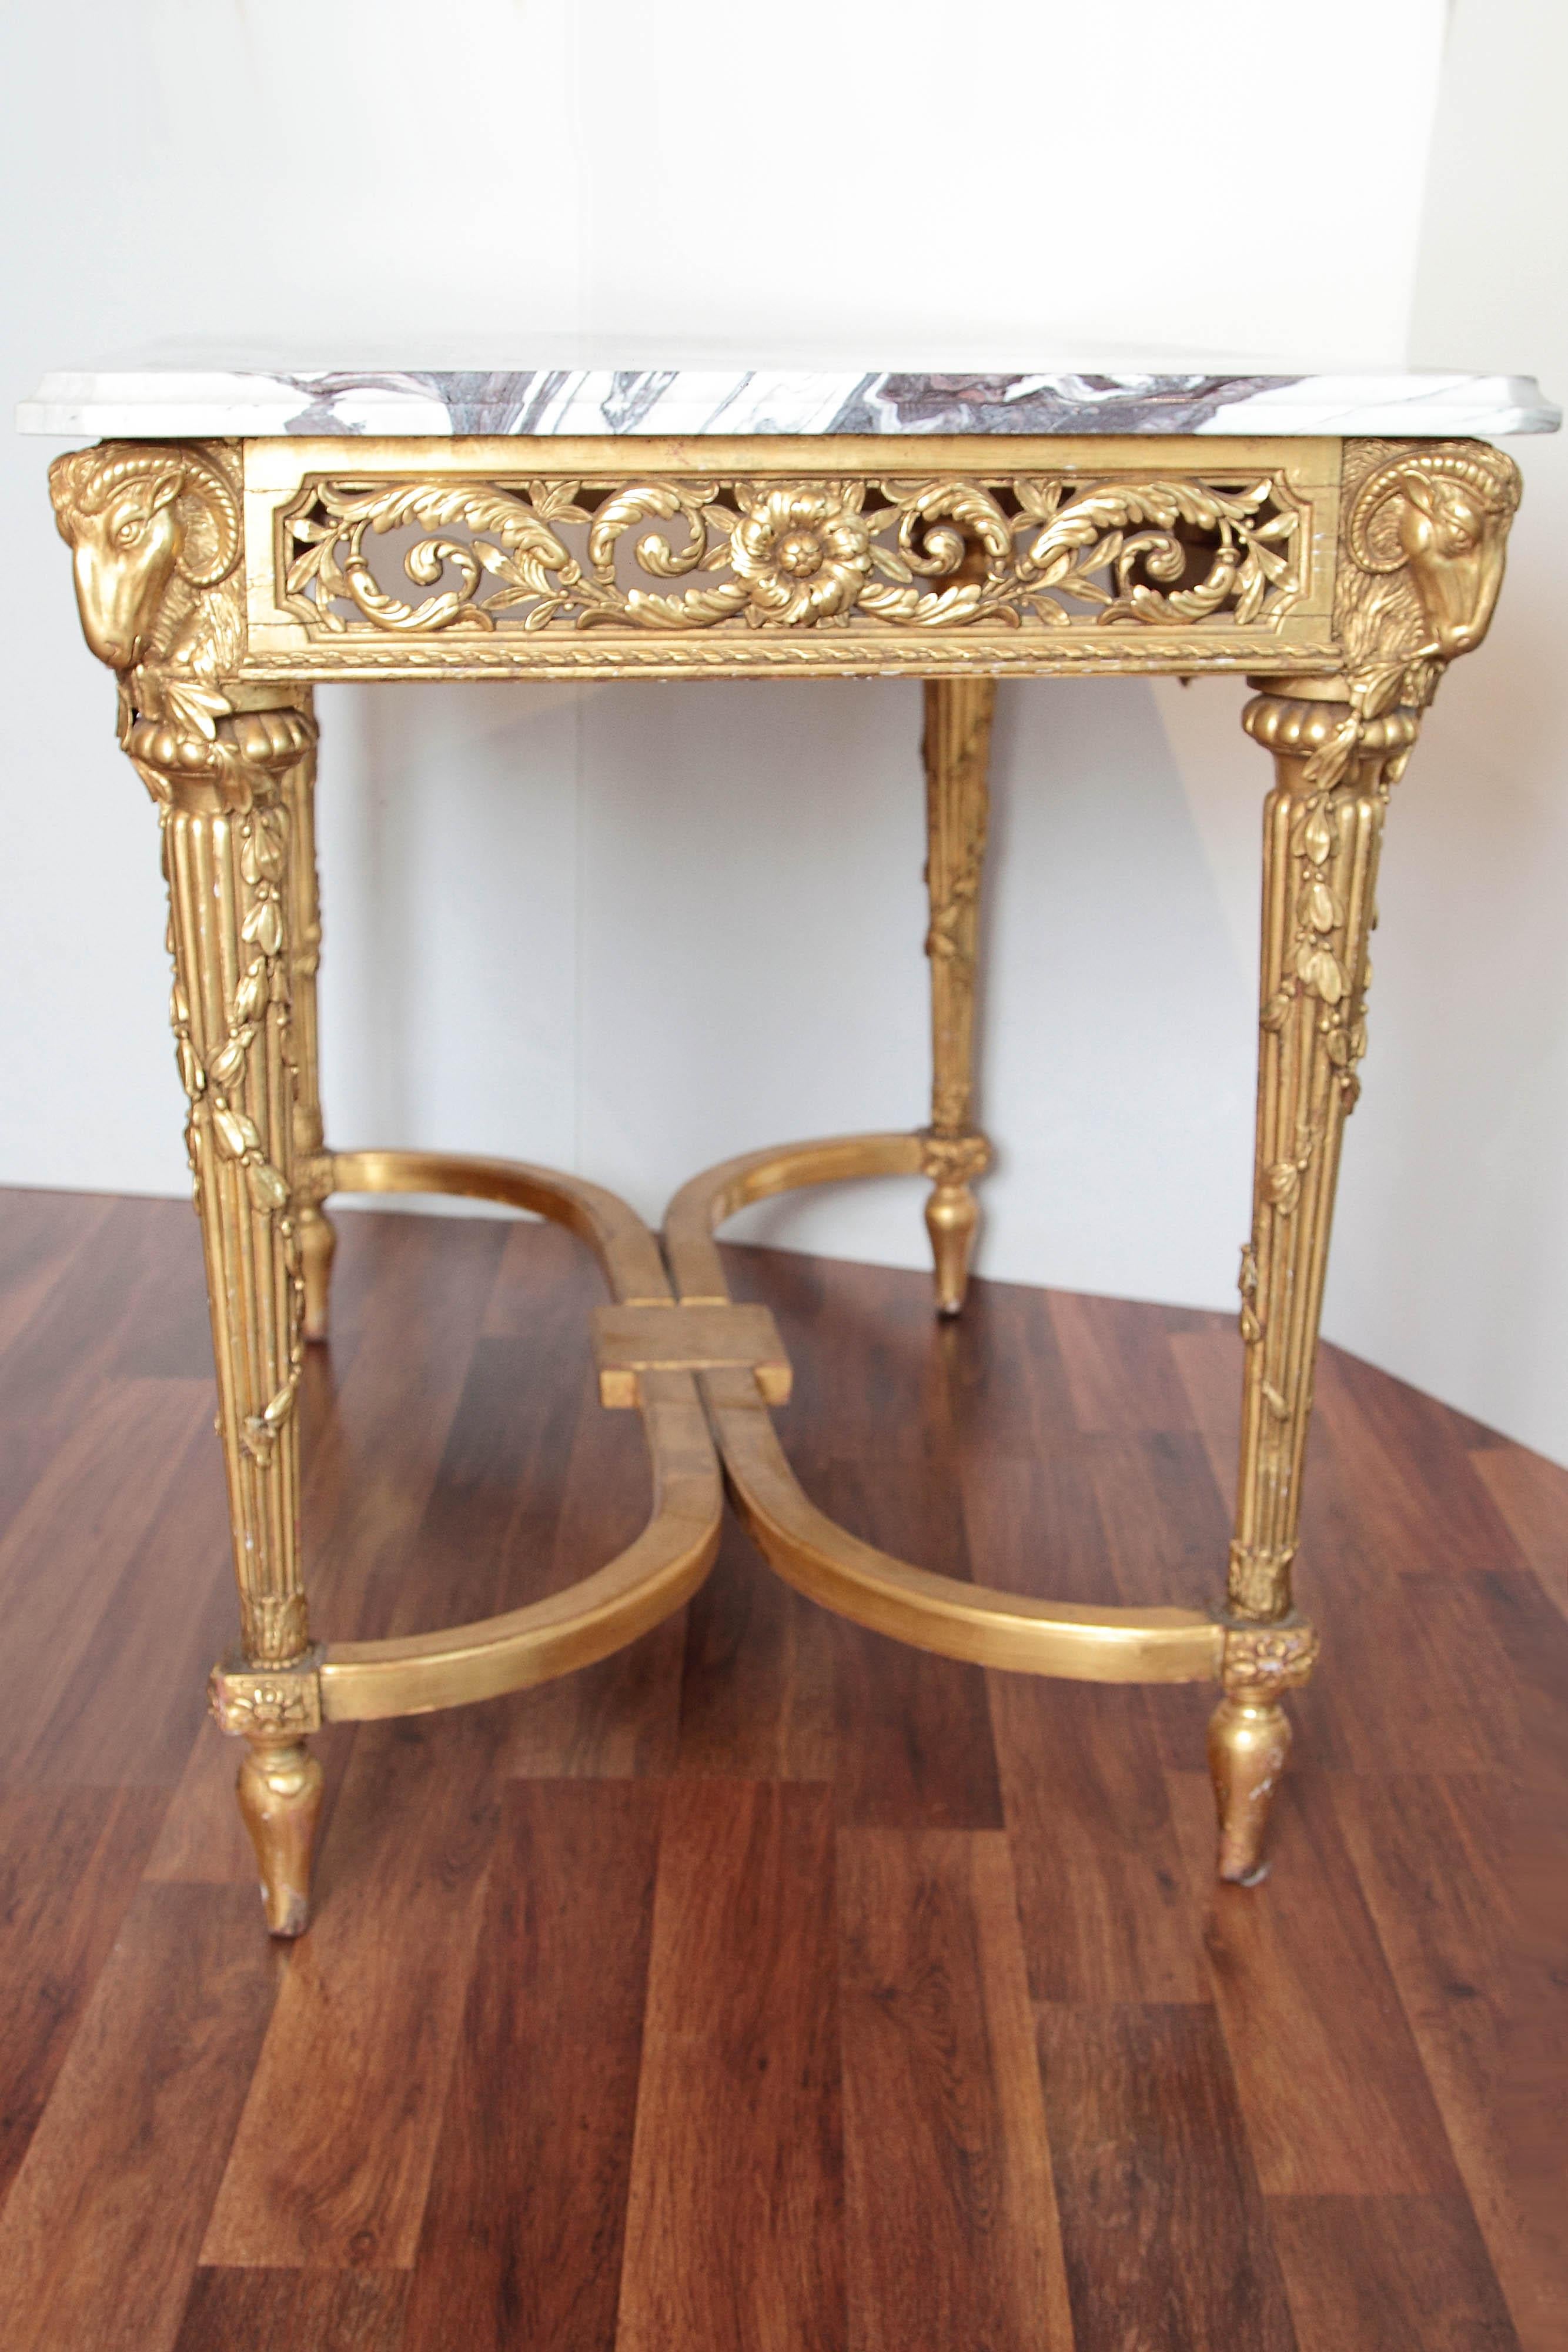 19th Century French Louis XVI Gilt Carved Salon Table For Sale 3